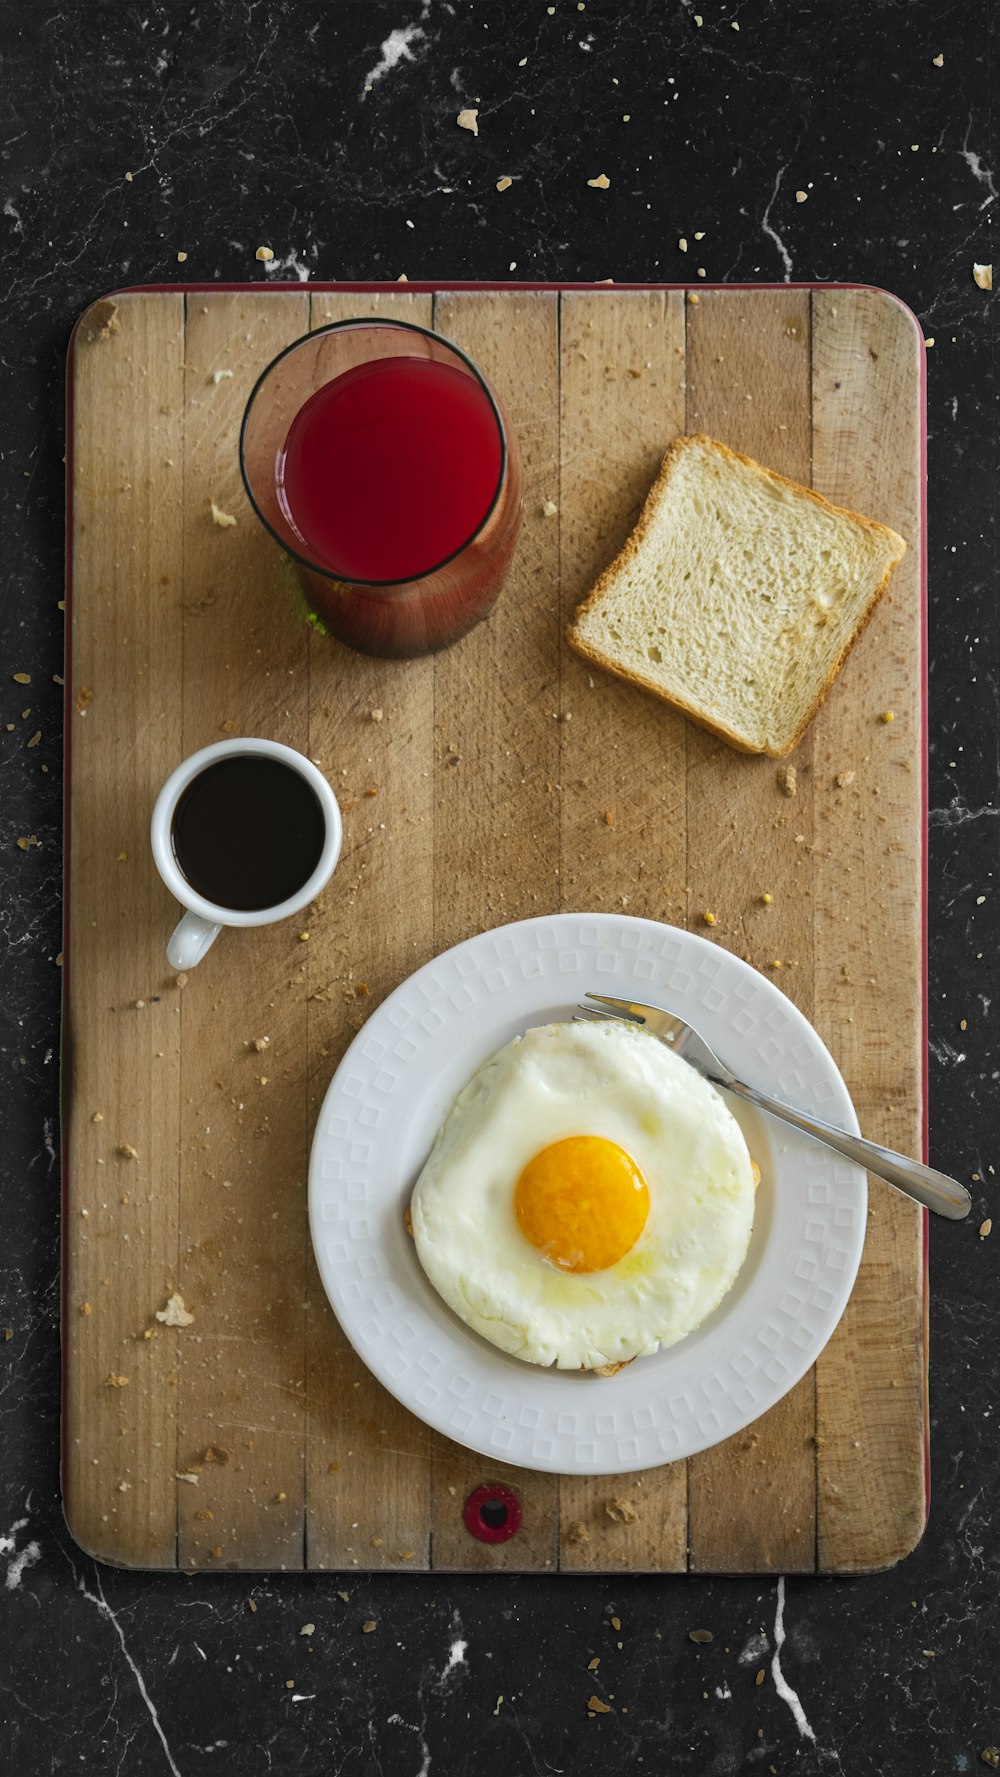 egg on white ceramic round plate beside red liquid in clear drinking glass